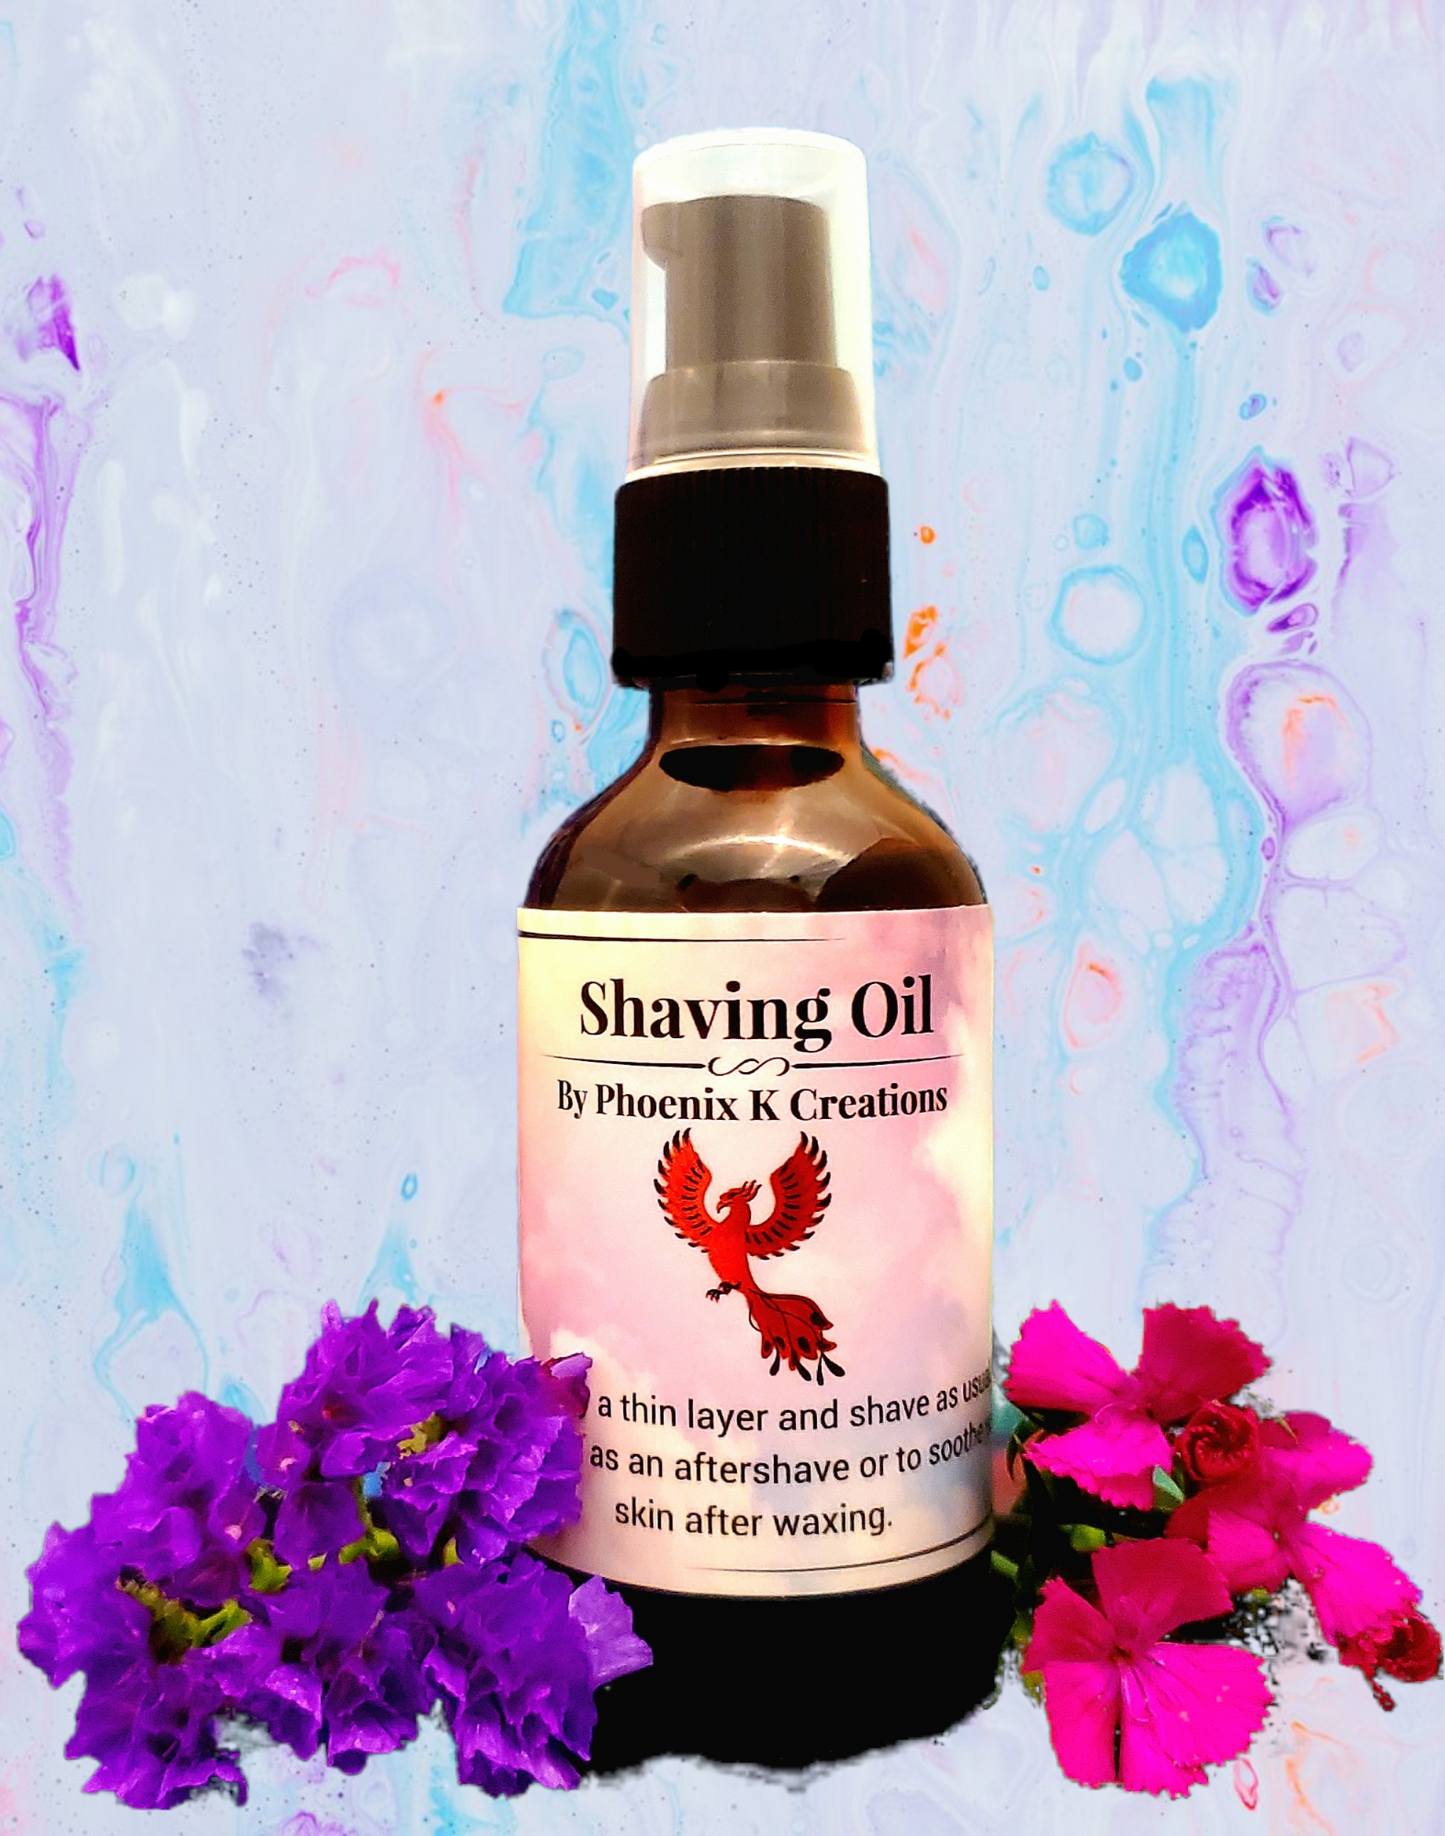 Organic Shaving Oil- Shaving, after shave, waxing, or beard oil.